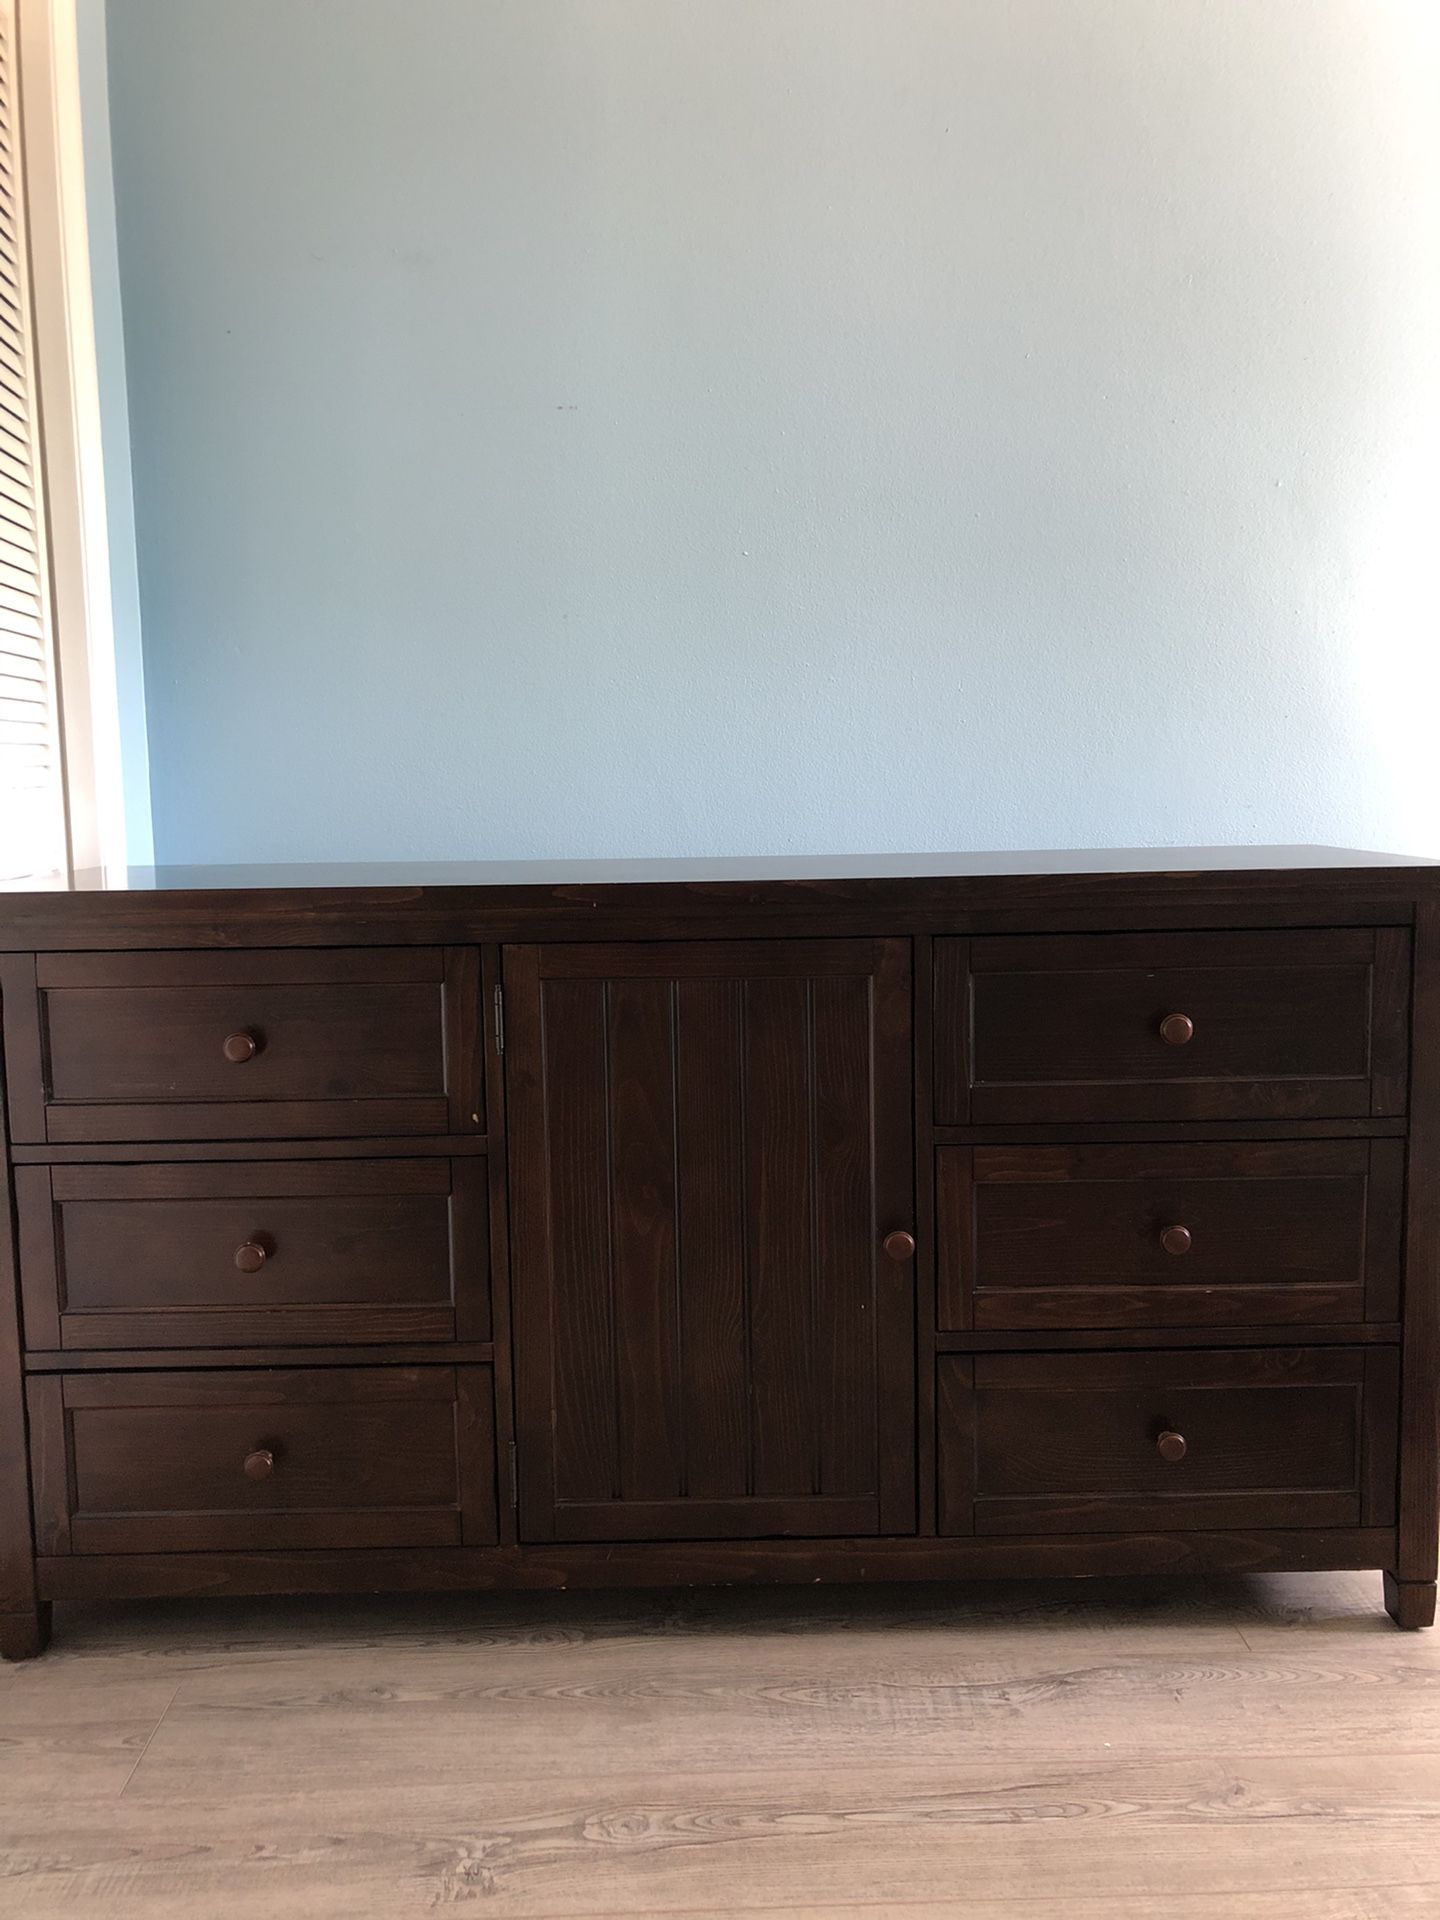 Pottery barn teen bedroom set {bed frame(full), dresser, night stand} will consider selling individually